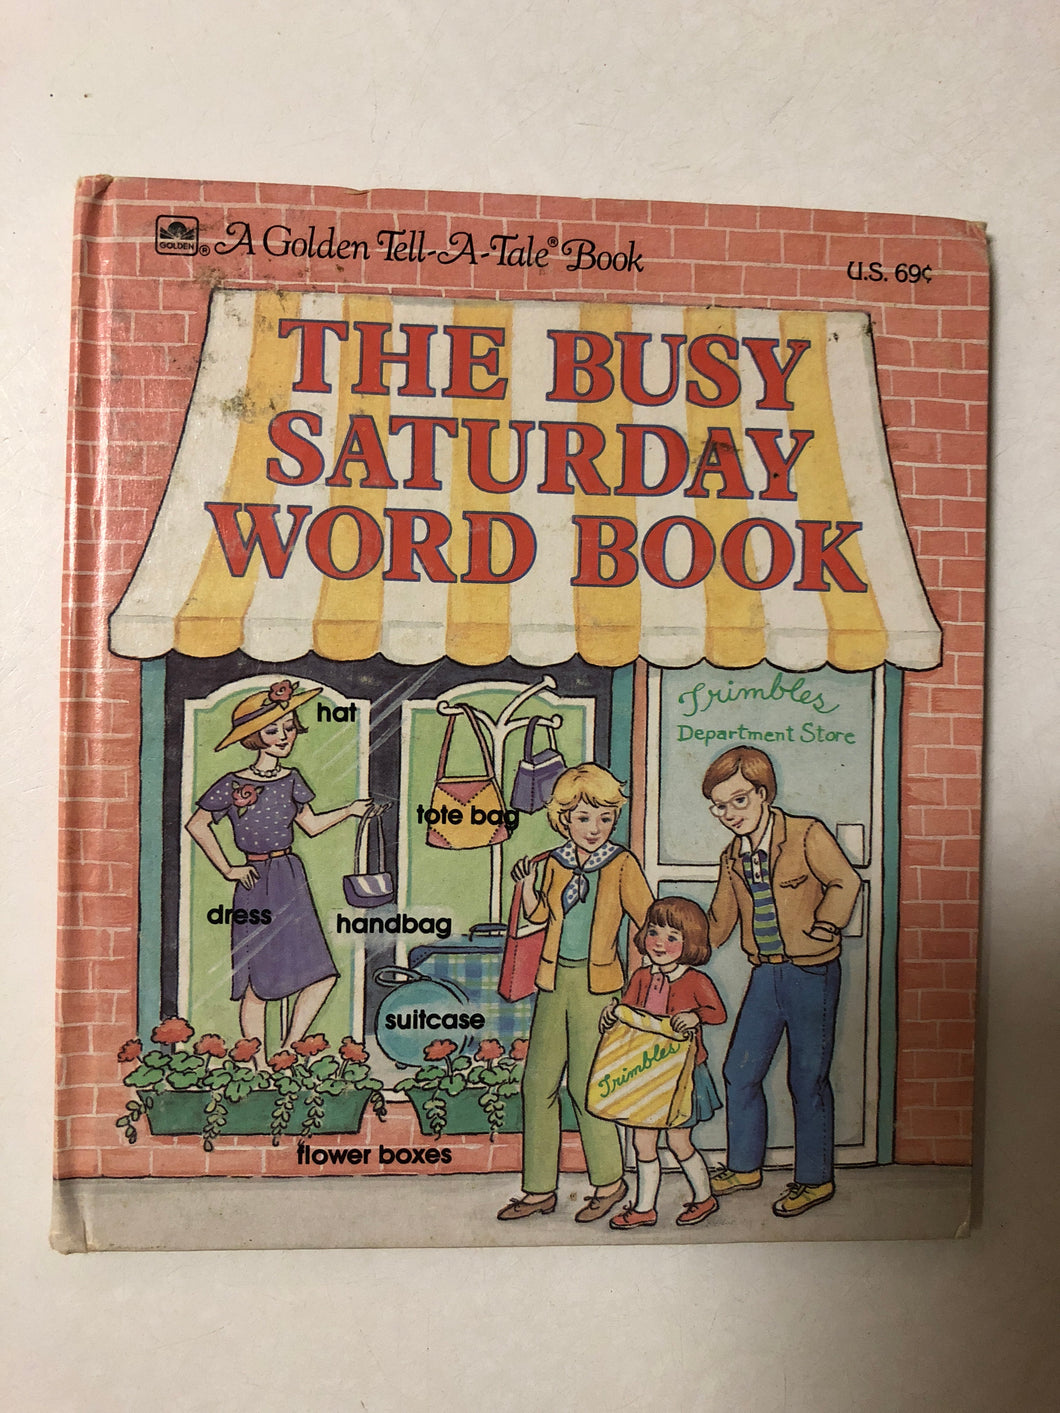 The Busy Saturday Word Book - Slick Cat Books 